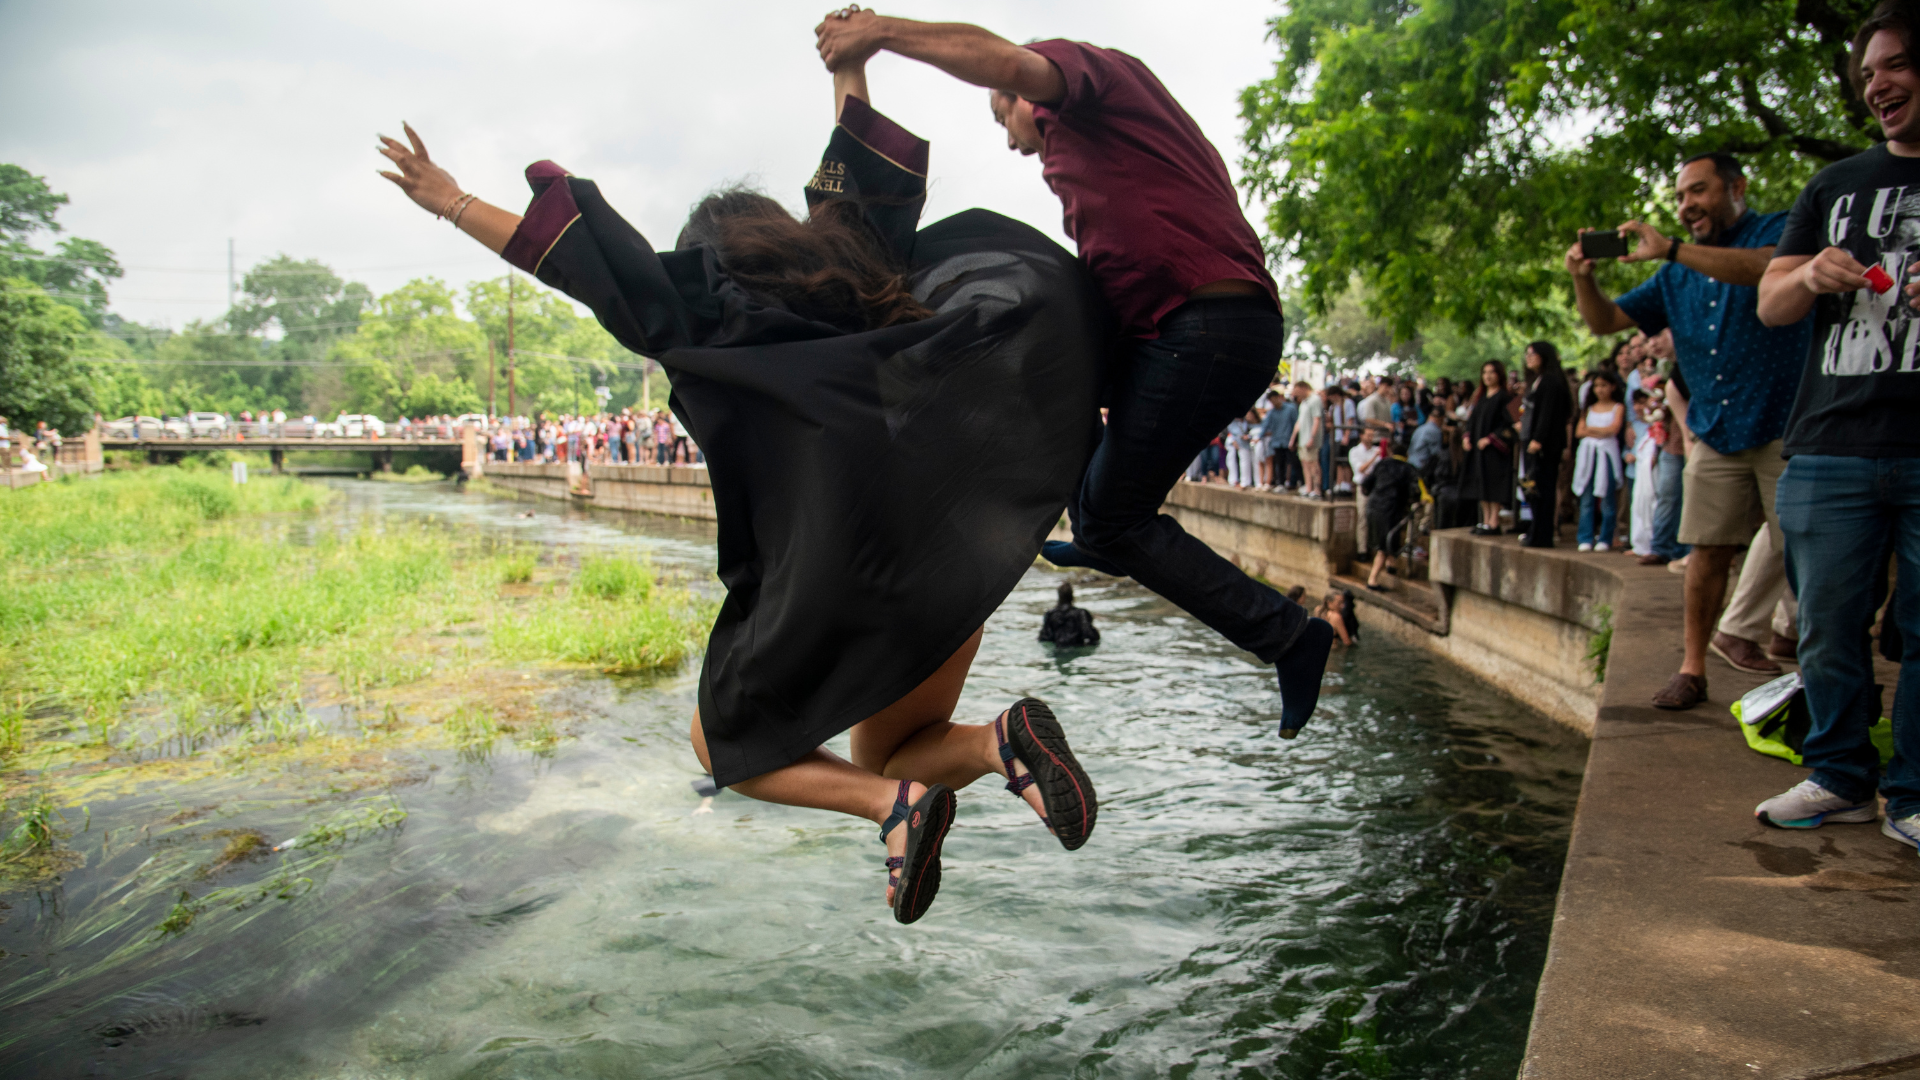 TXST student celebrating graduation with a river jump with parent